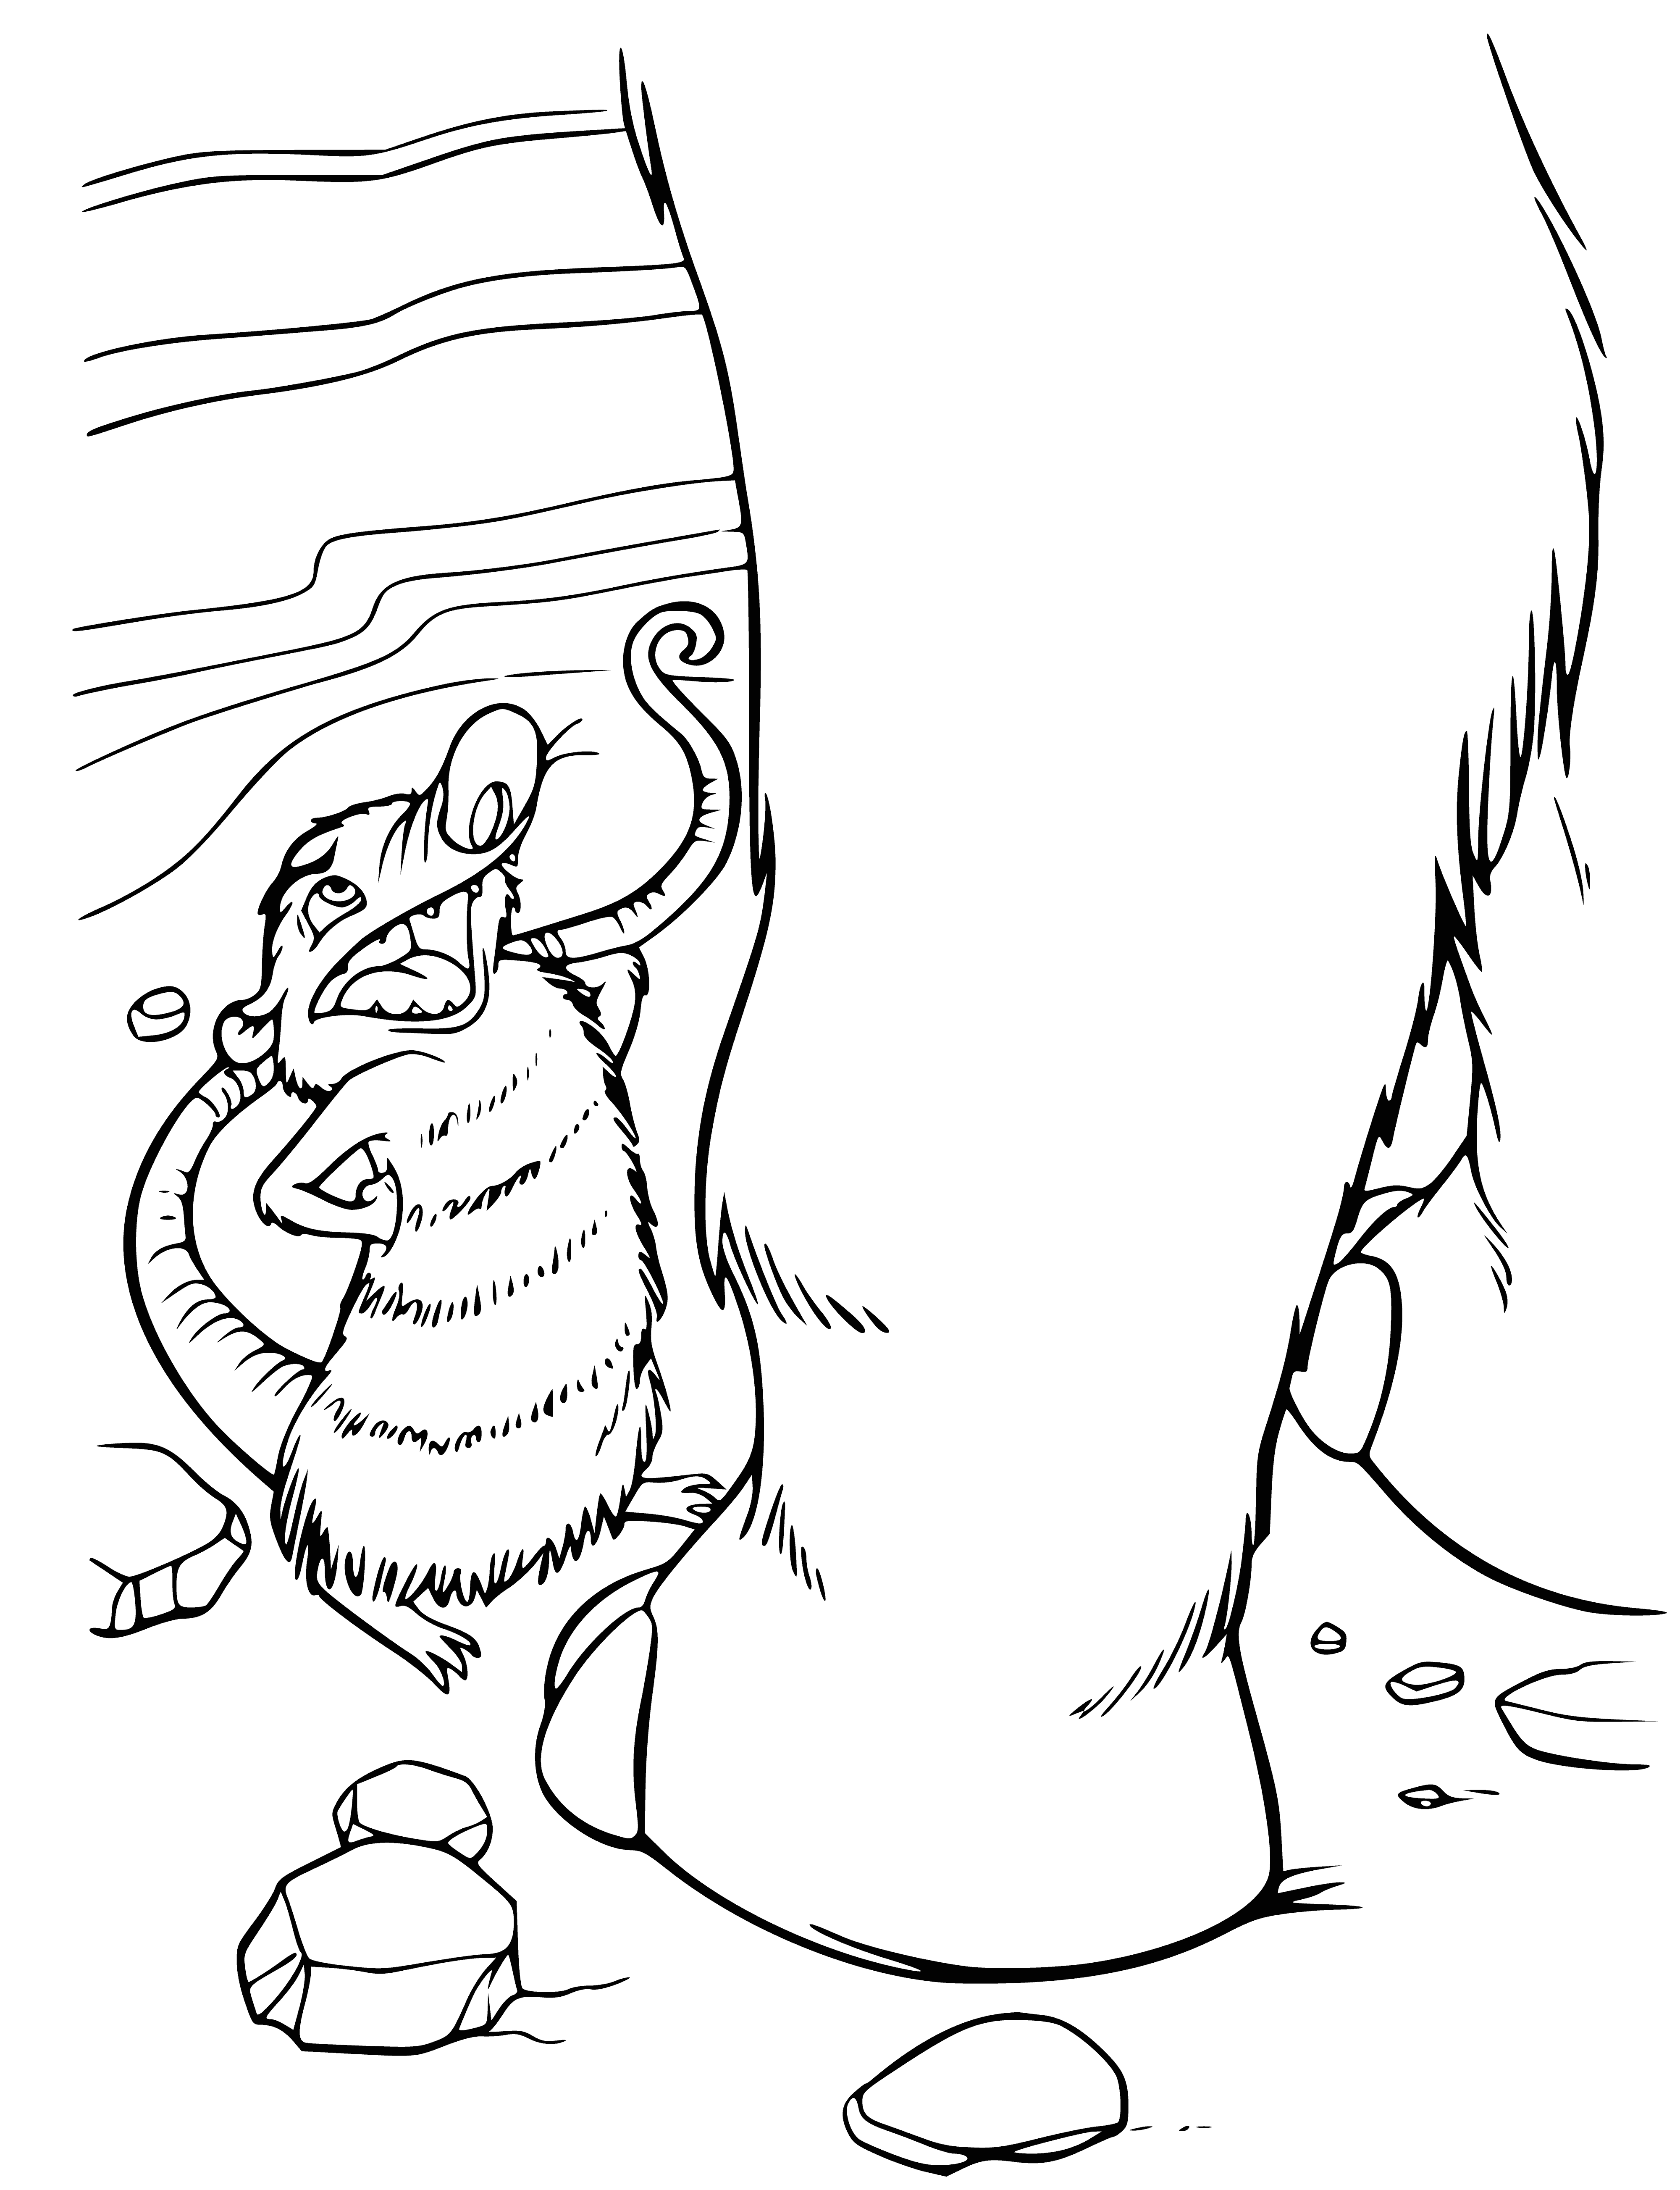 coloring page: Possum hangs from tree branch, small & gray-furred; mammoth near by, larger & matted gray. Both have small eyes.